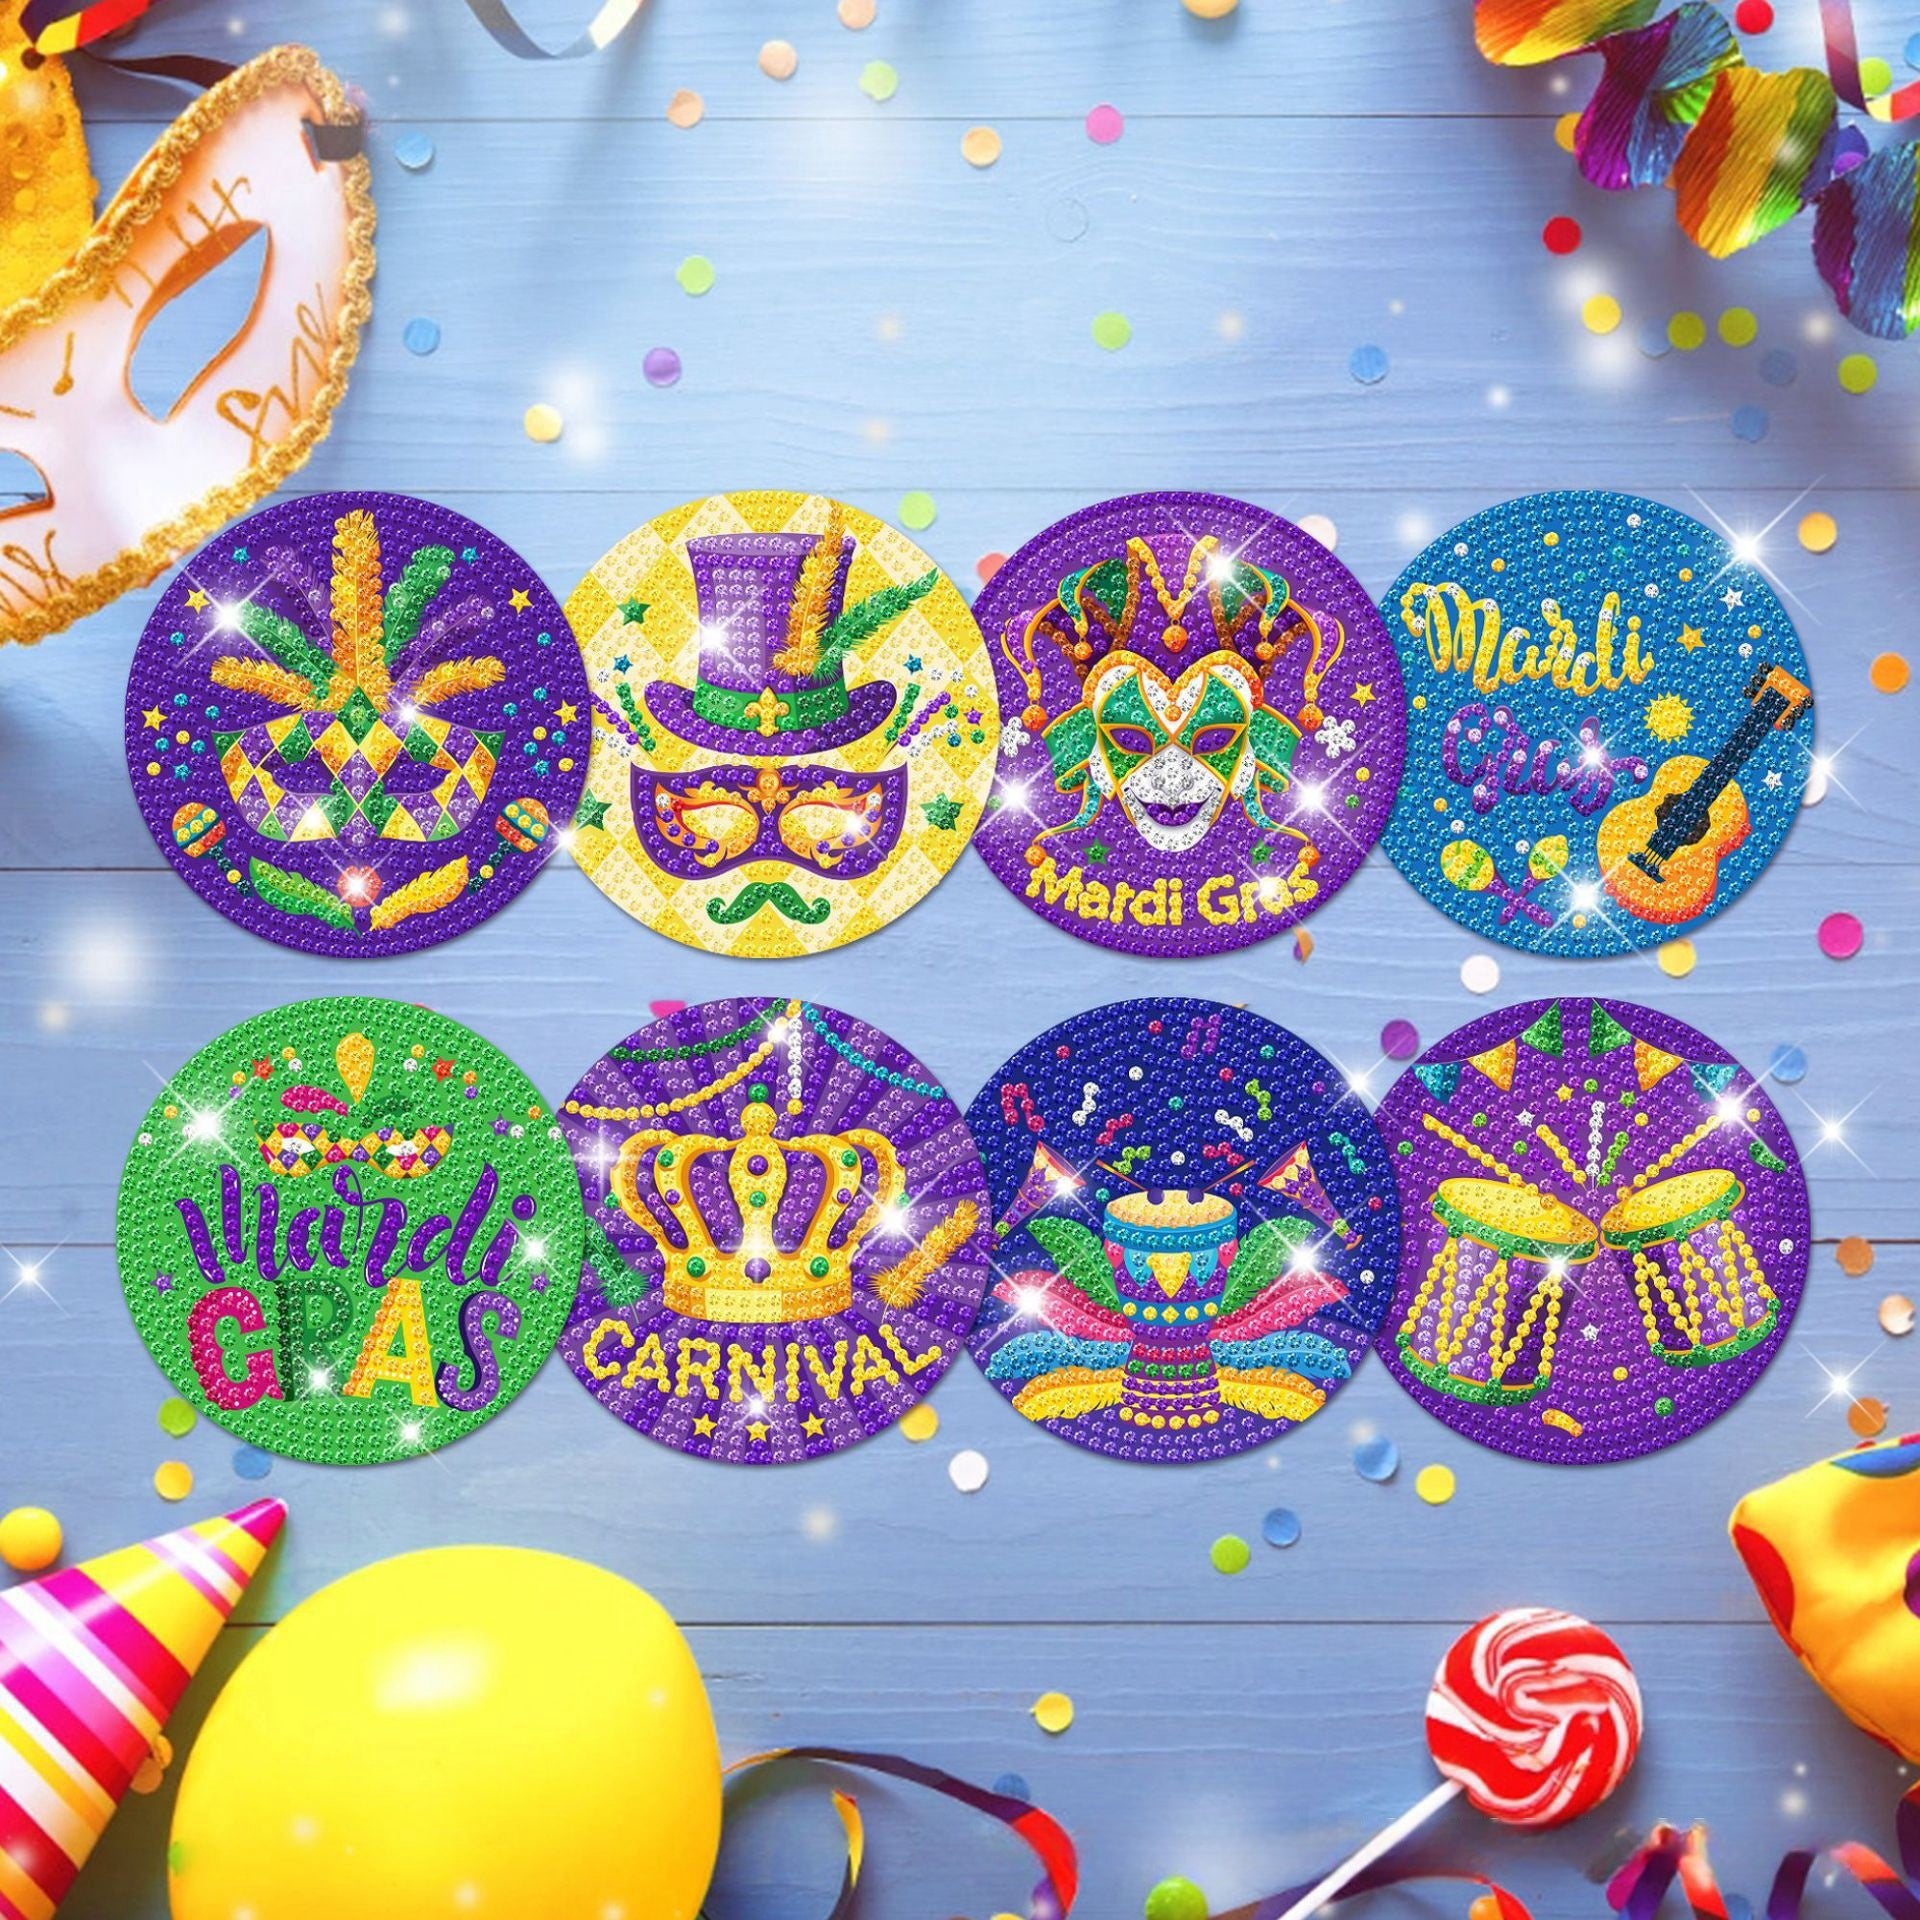 Bulk Set of 40 Drink Coasters with Diamond Stickers for Mardi Gras Party Wholesale